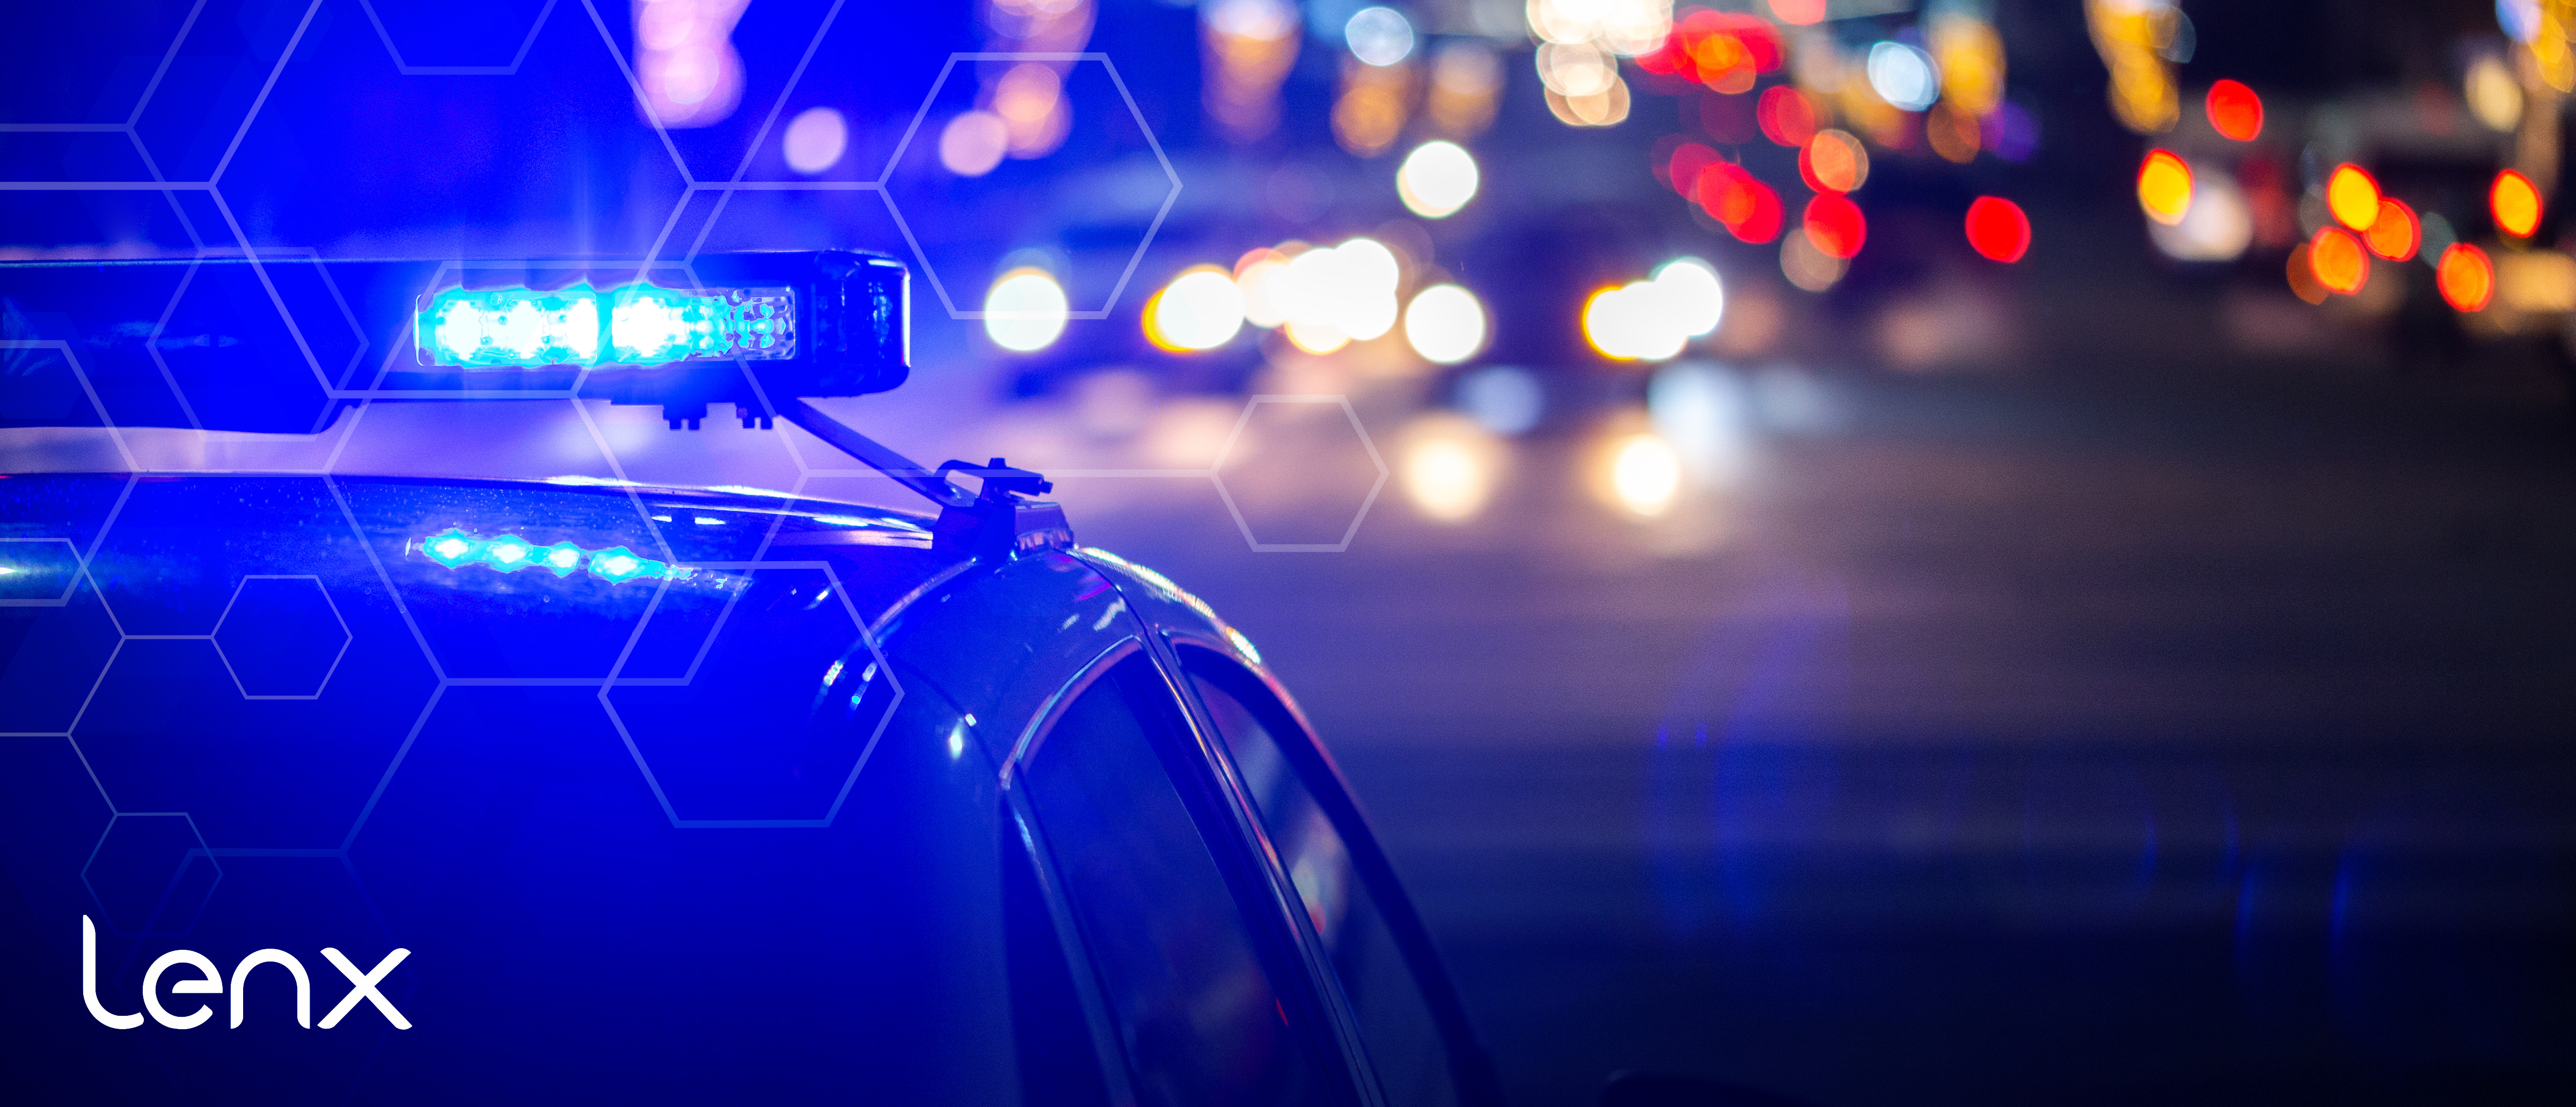 Combining AI Security and Active Shooter Detection With A Comprehensive Communication Platform